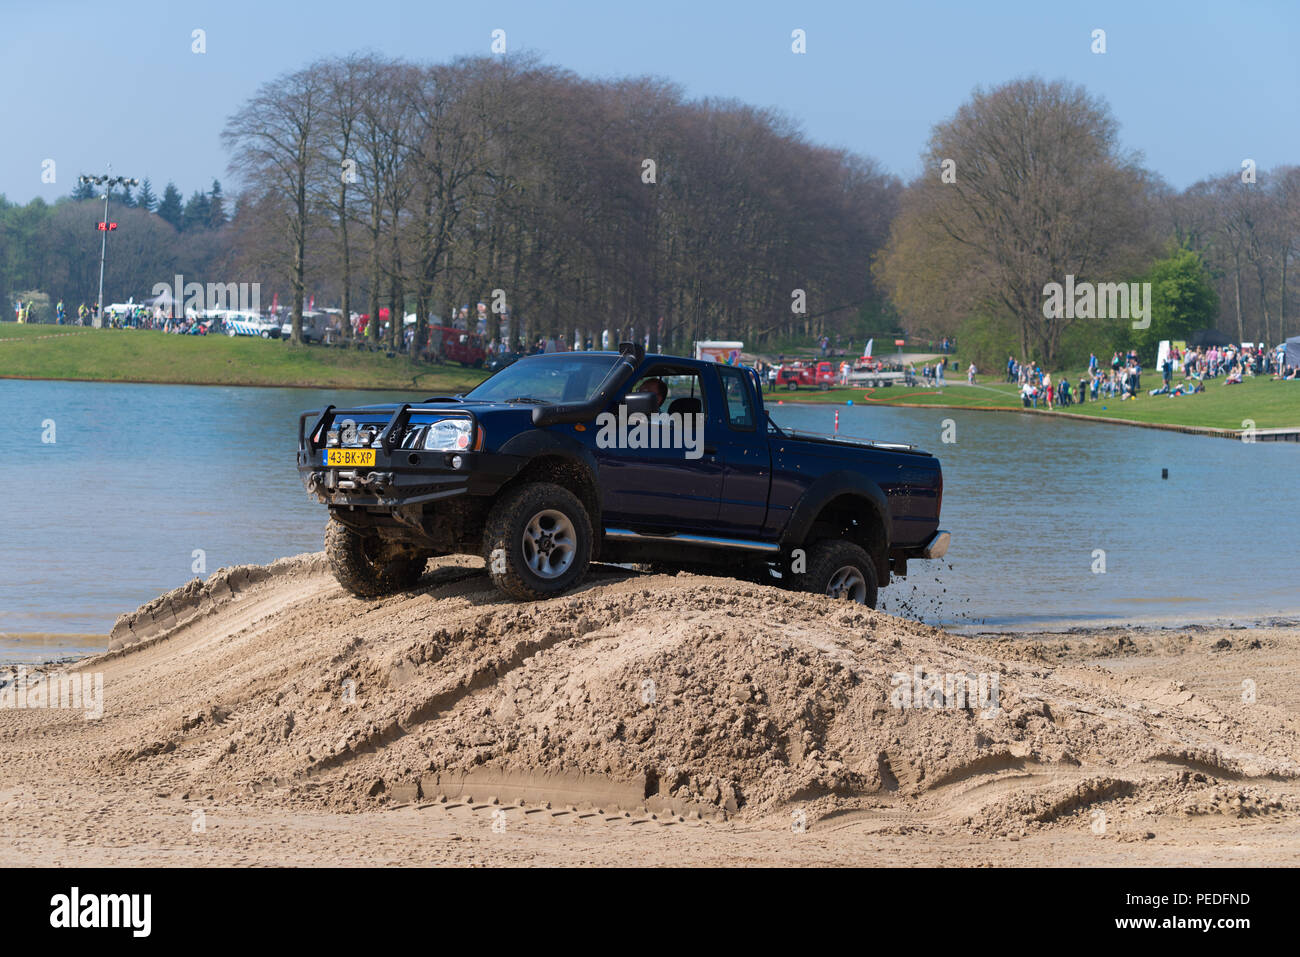 OLDENZAAL NETHERLANDS - APRIL 9, 2017: People having fun in an offroad car during an annual event Stock Photo